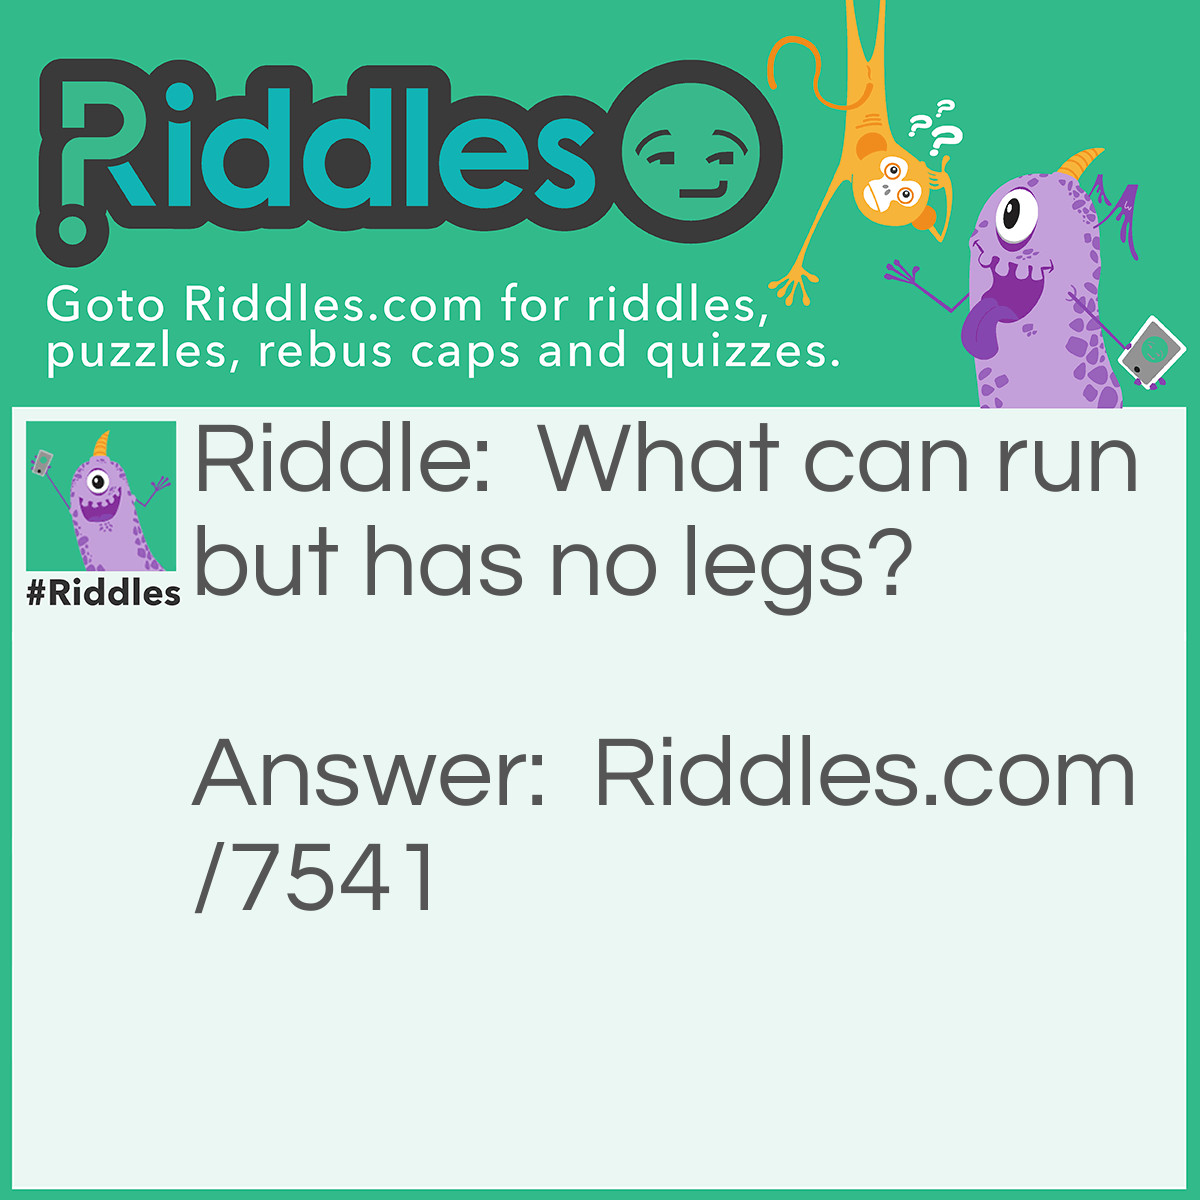 Riddle: What can run but has no legs? Answer: An engine.